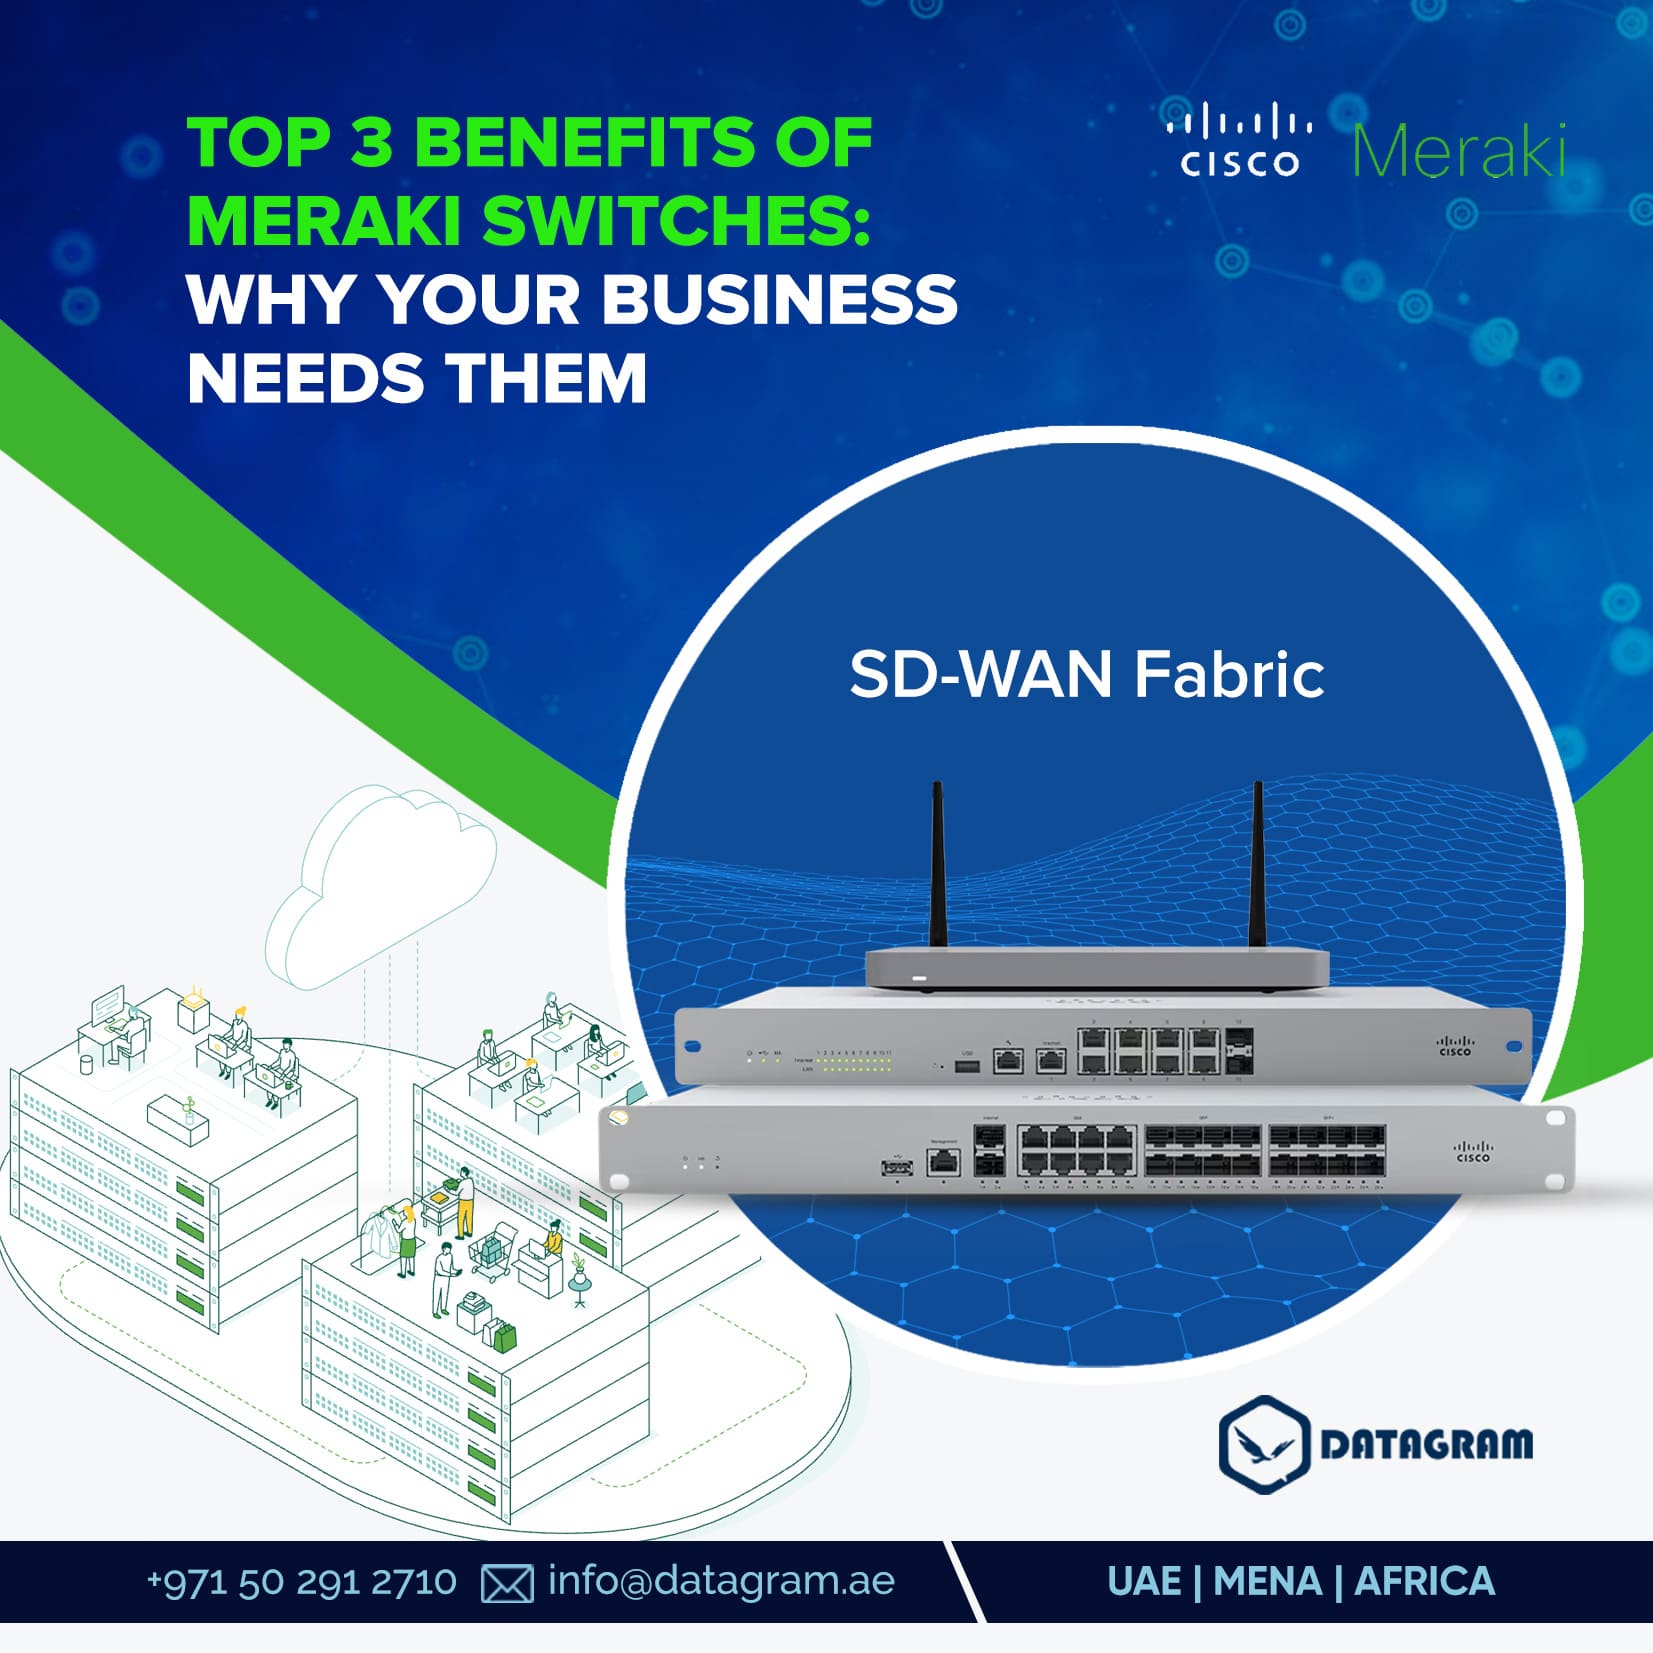 Top 3 Benefits of Meraki Switches: Why Your Business Needs Them